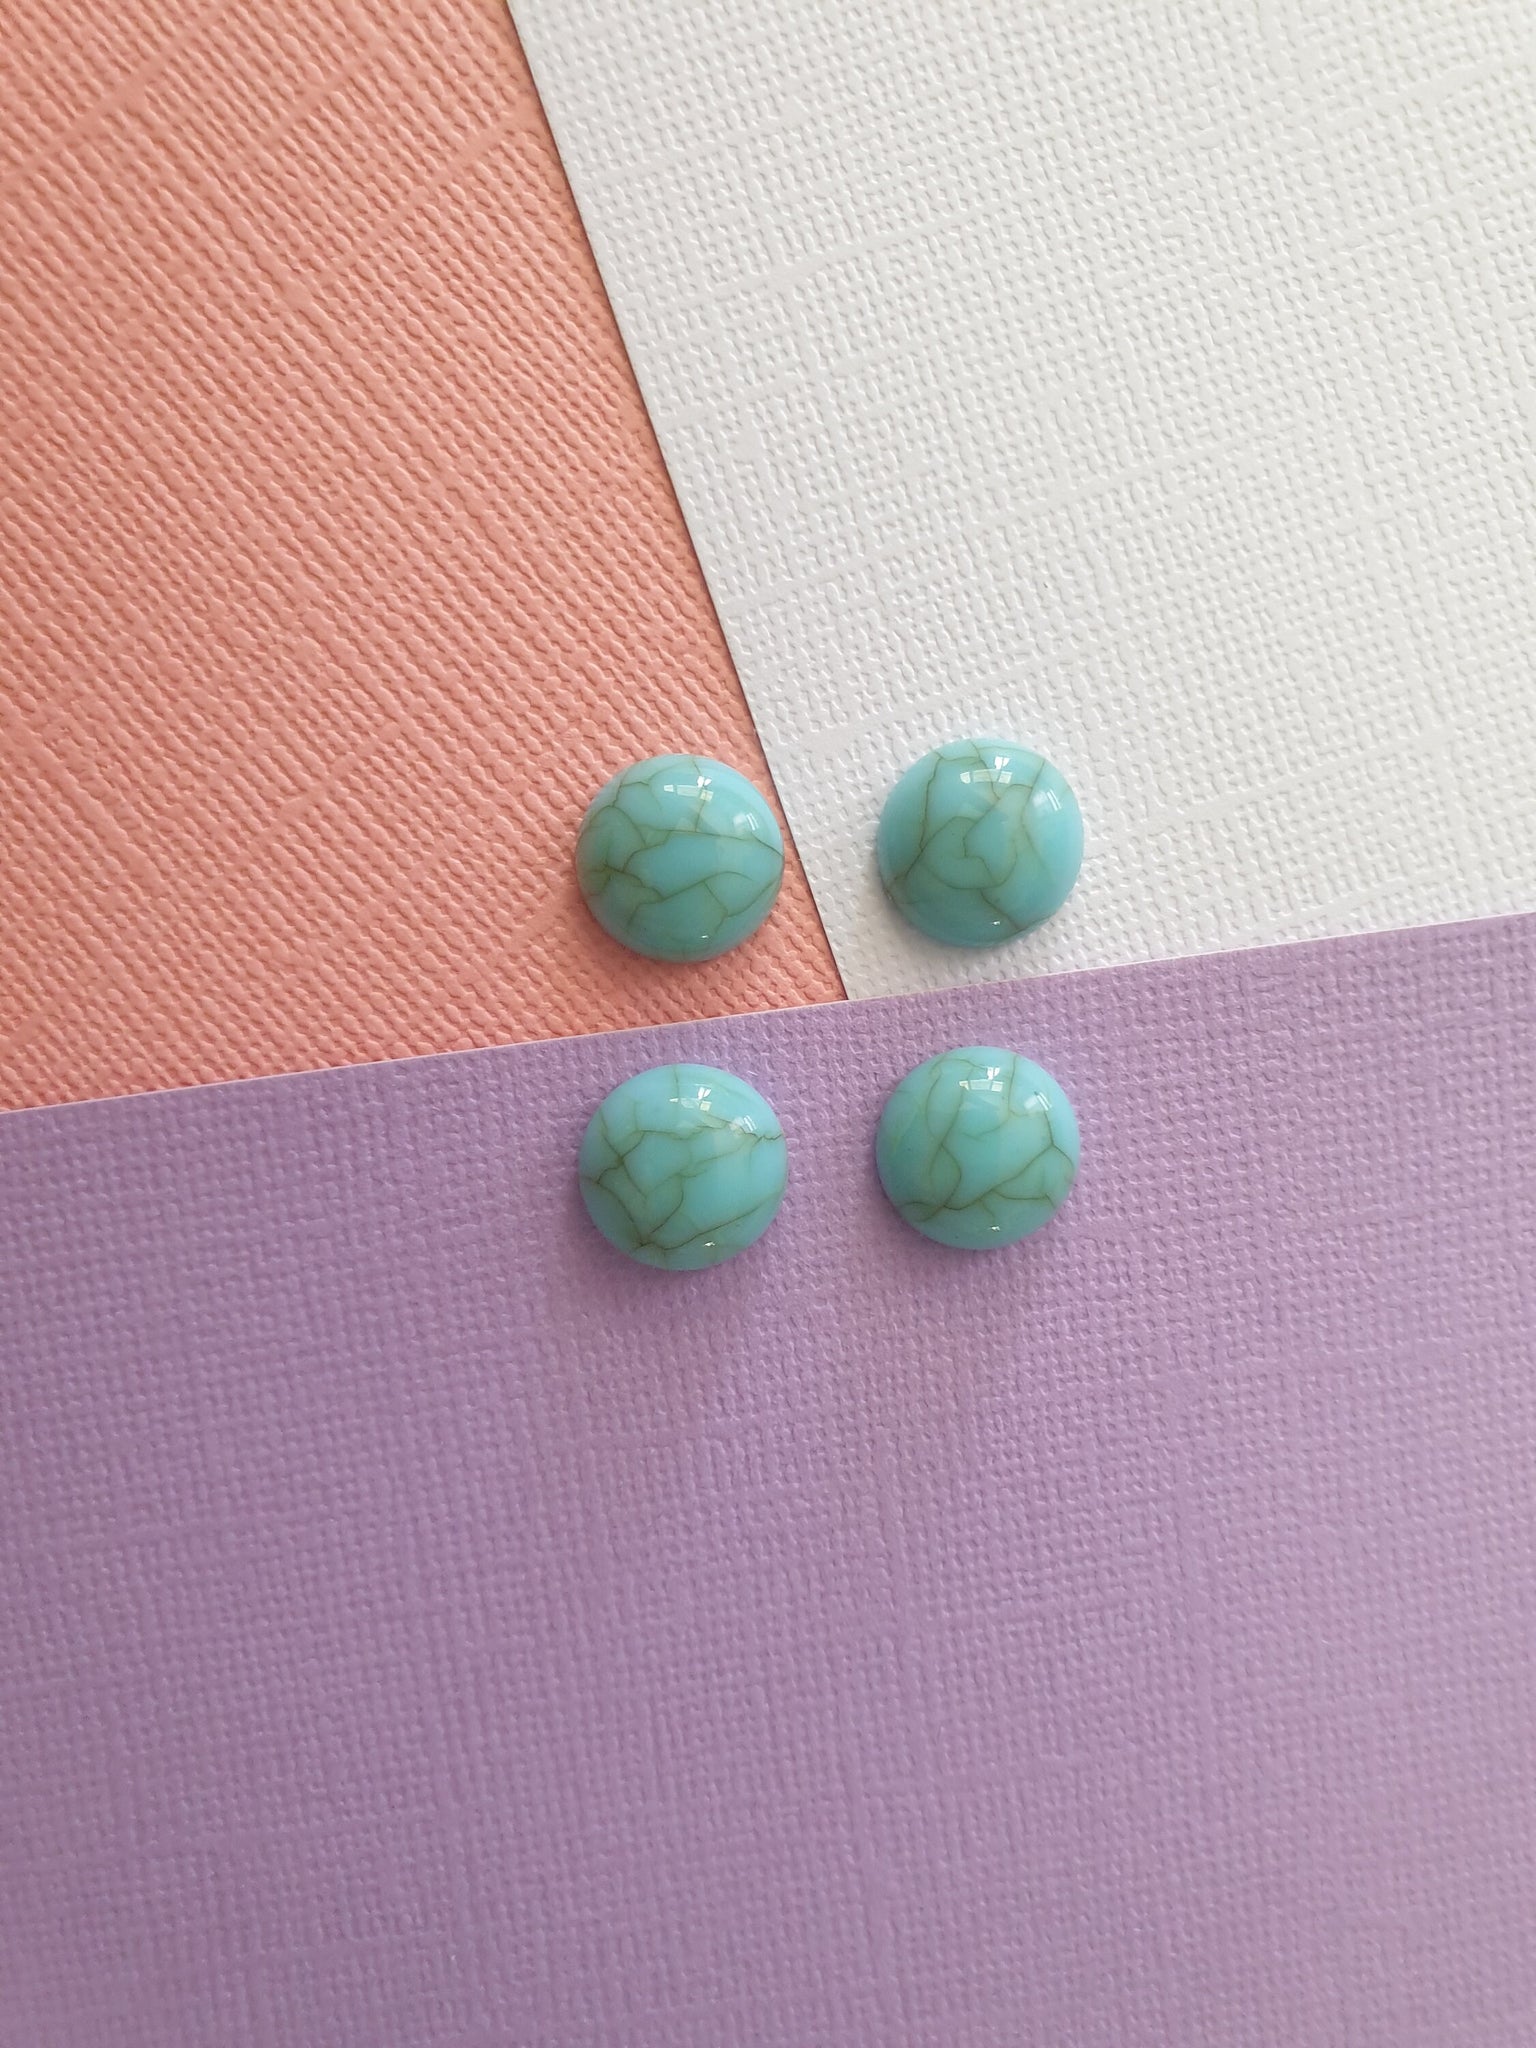 10pcs 12mm Green Color Turquoise Flat Back Resin Cabochons Cameo Jewellery supplies, findings, wholesale australia, DIY earrings, bracelet